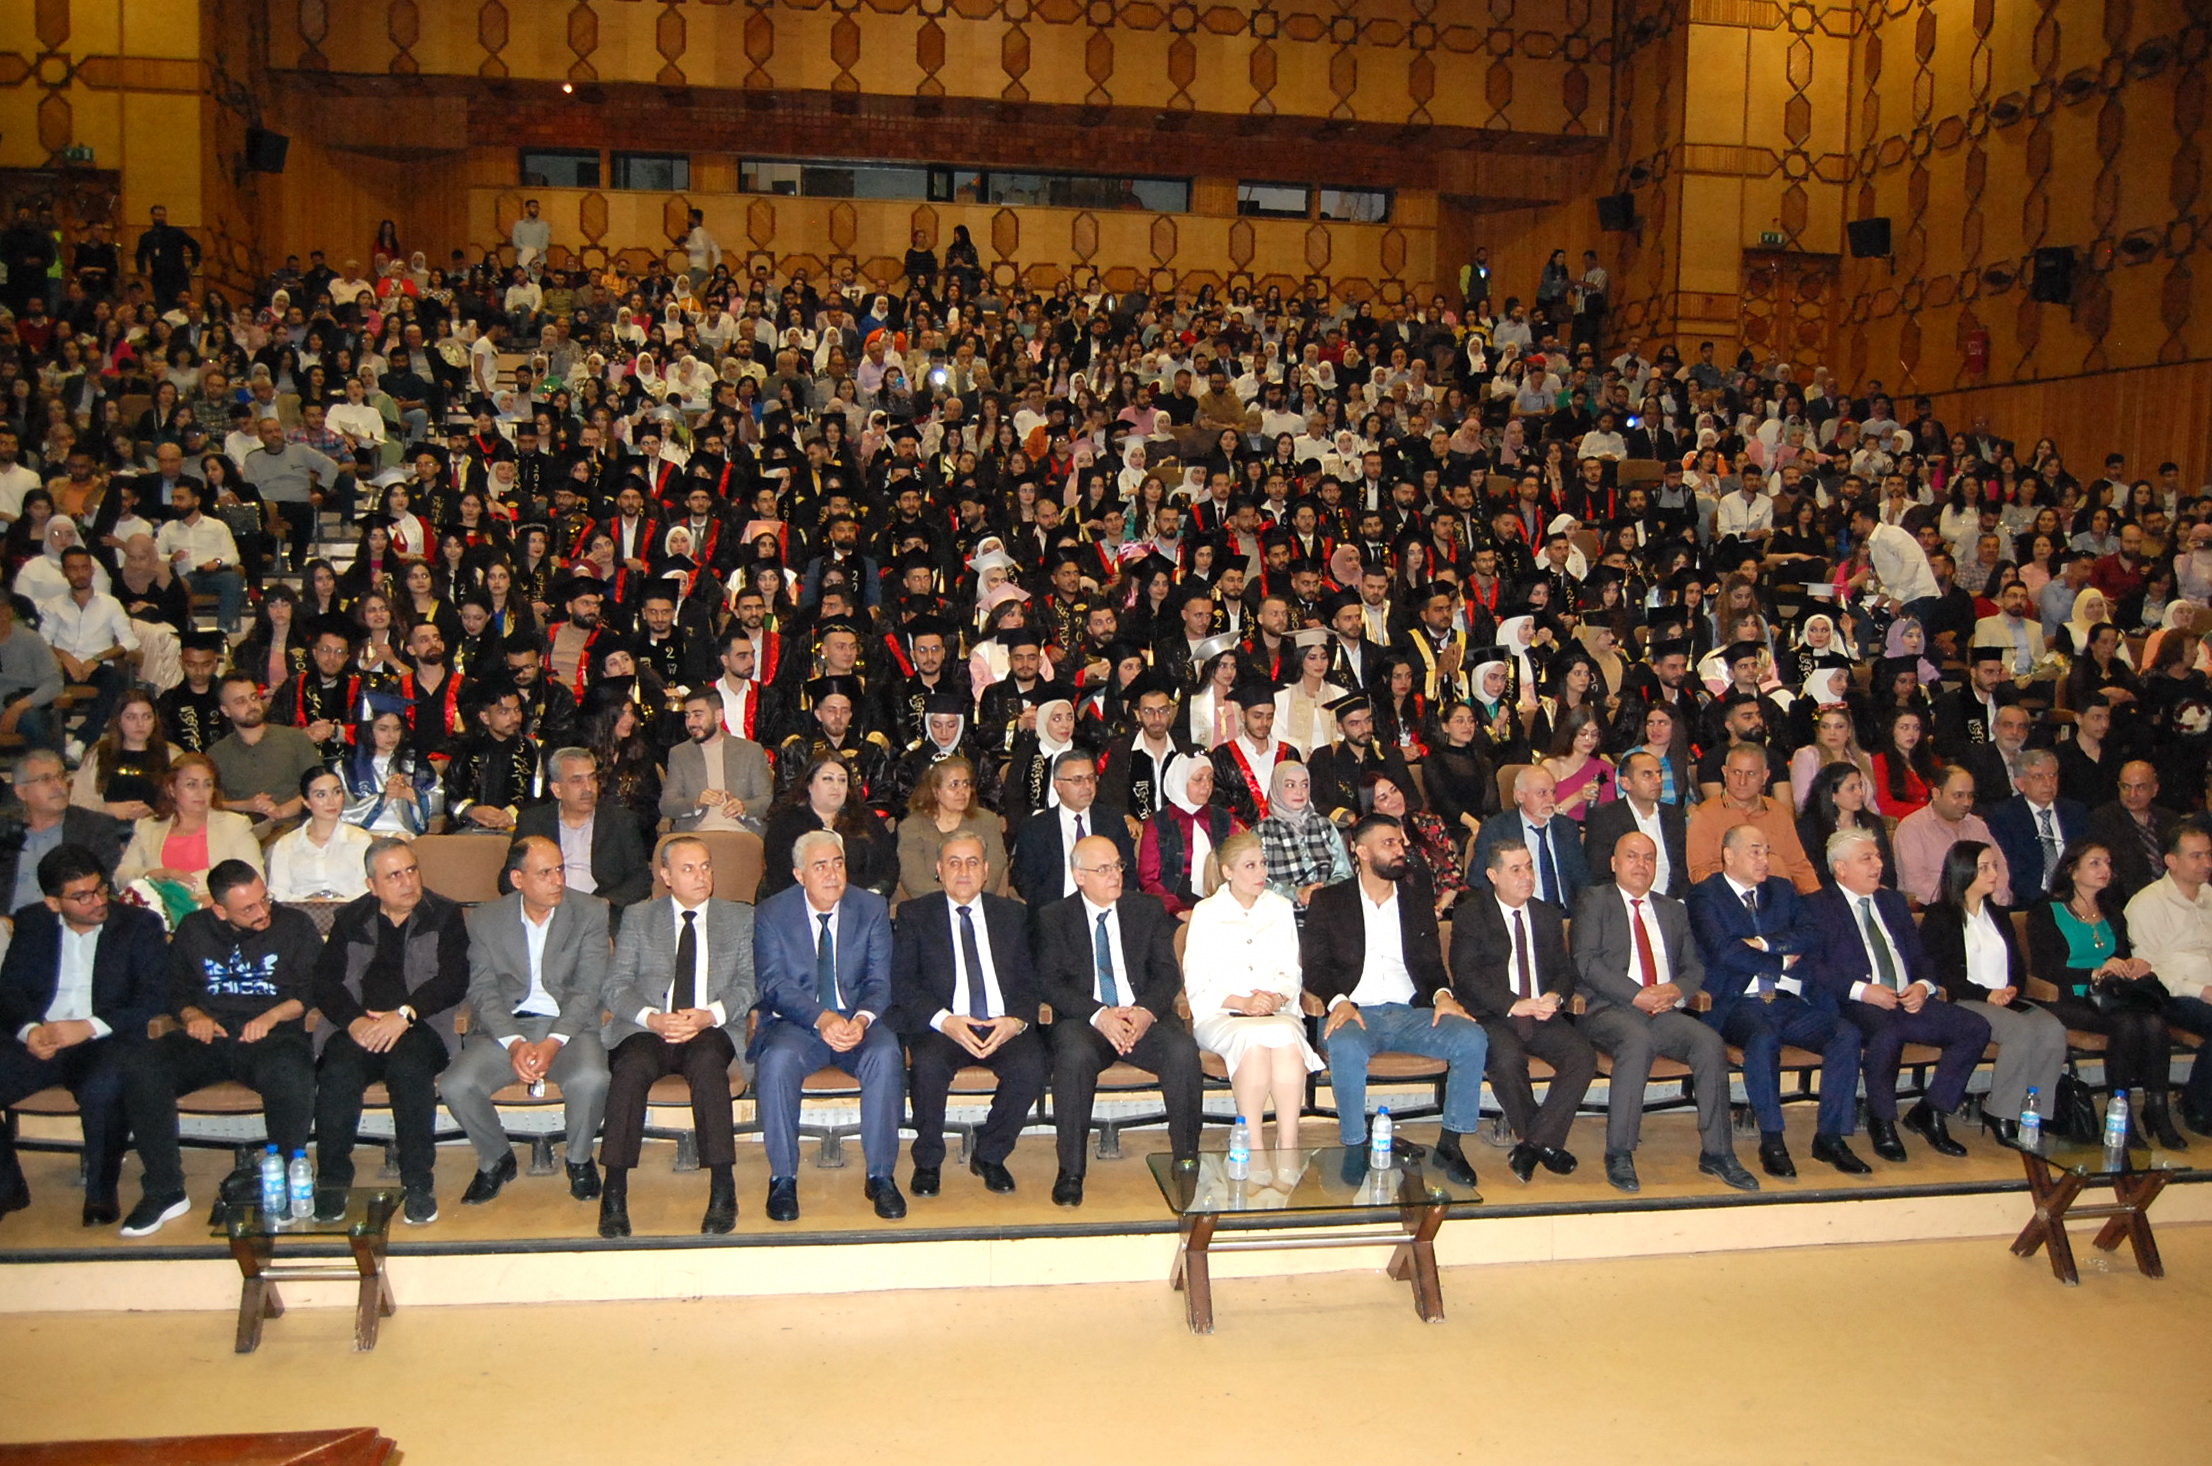 Tishreen University celebrates the graduation of the 36th batch of students from the Faculty of Dentistry